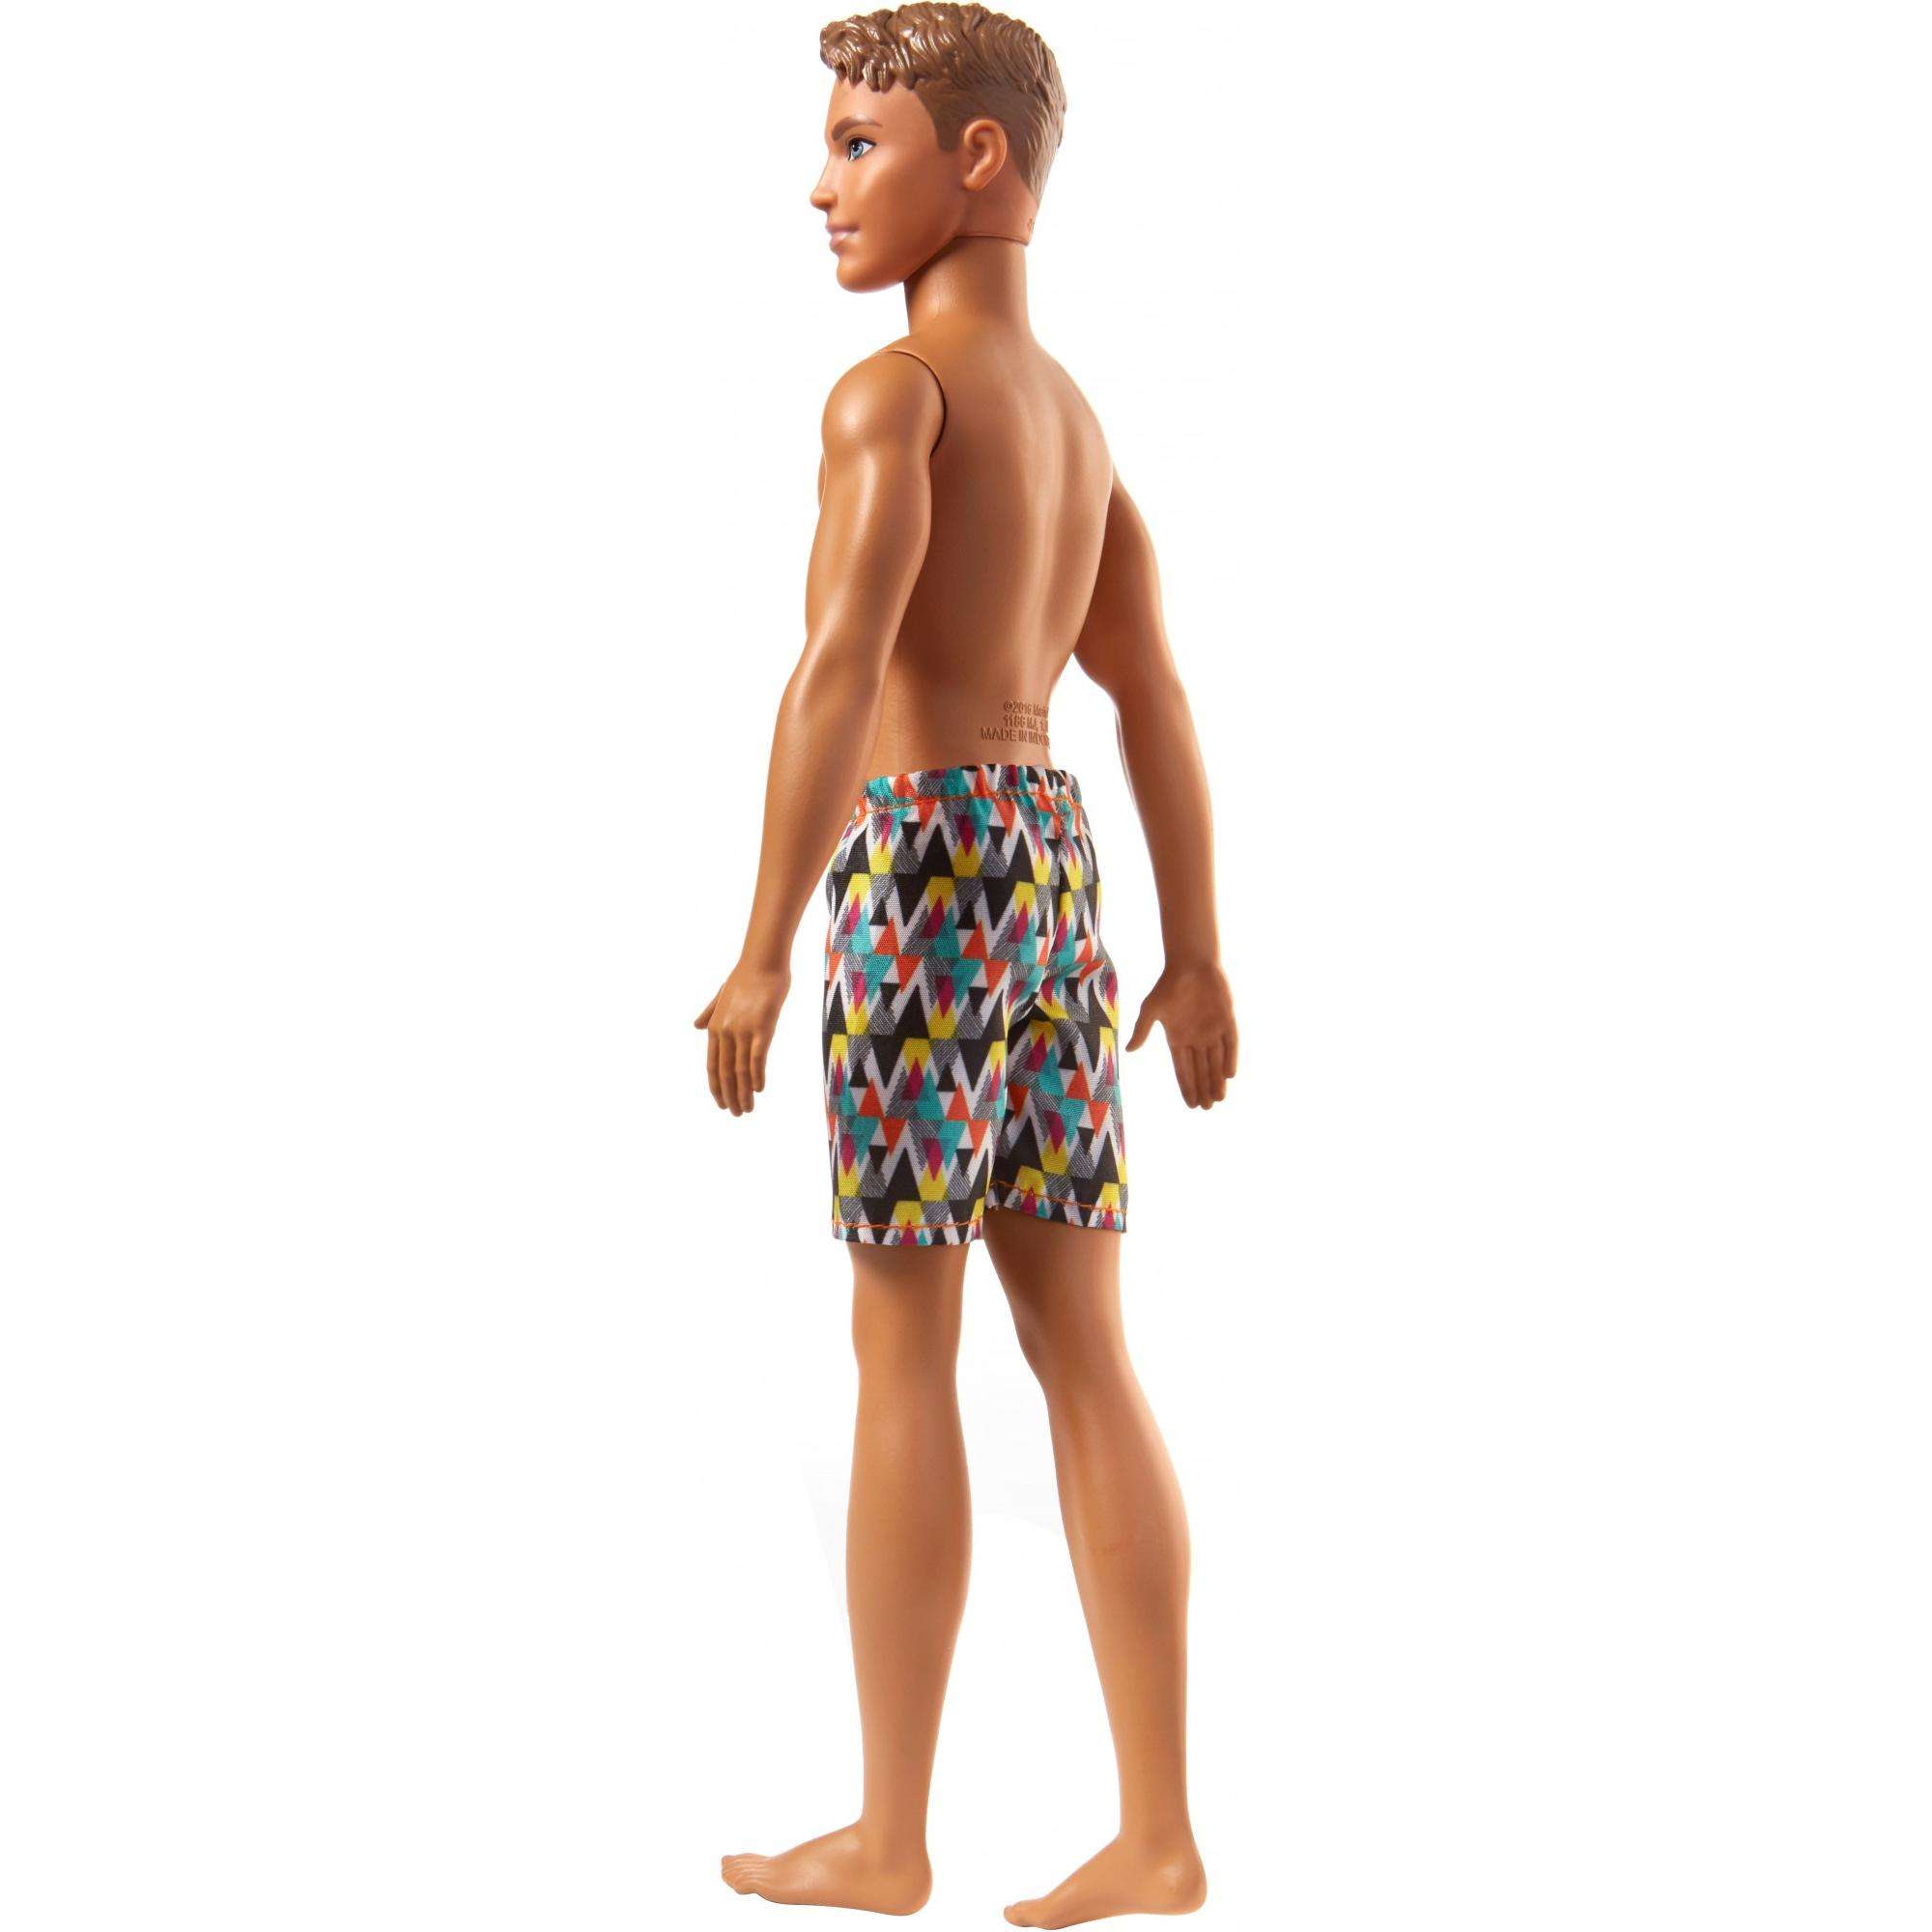 Barbie Ken Beach Doll with Multi-Colored Swimsuit Trunks - image 2 of 4